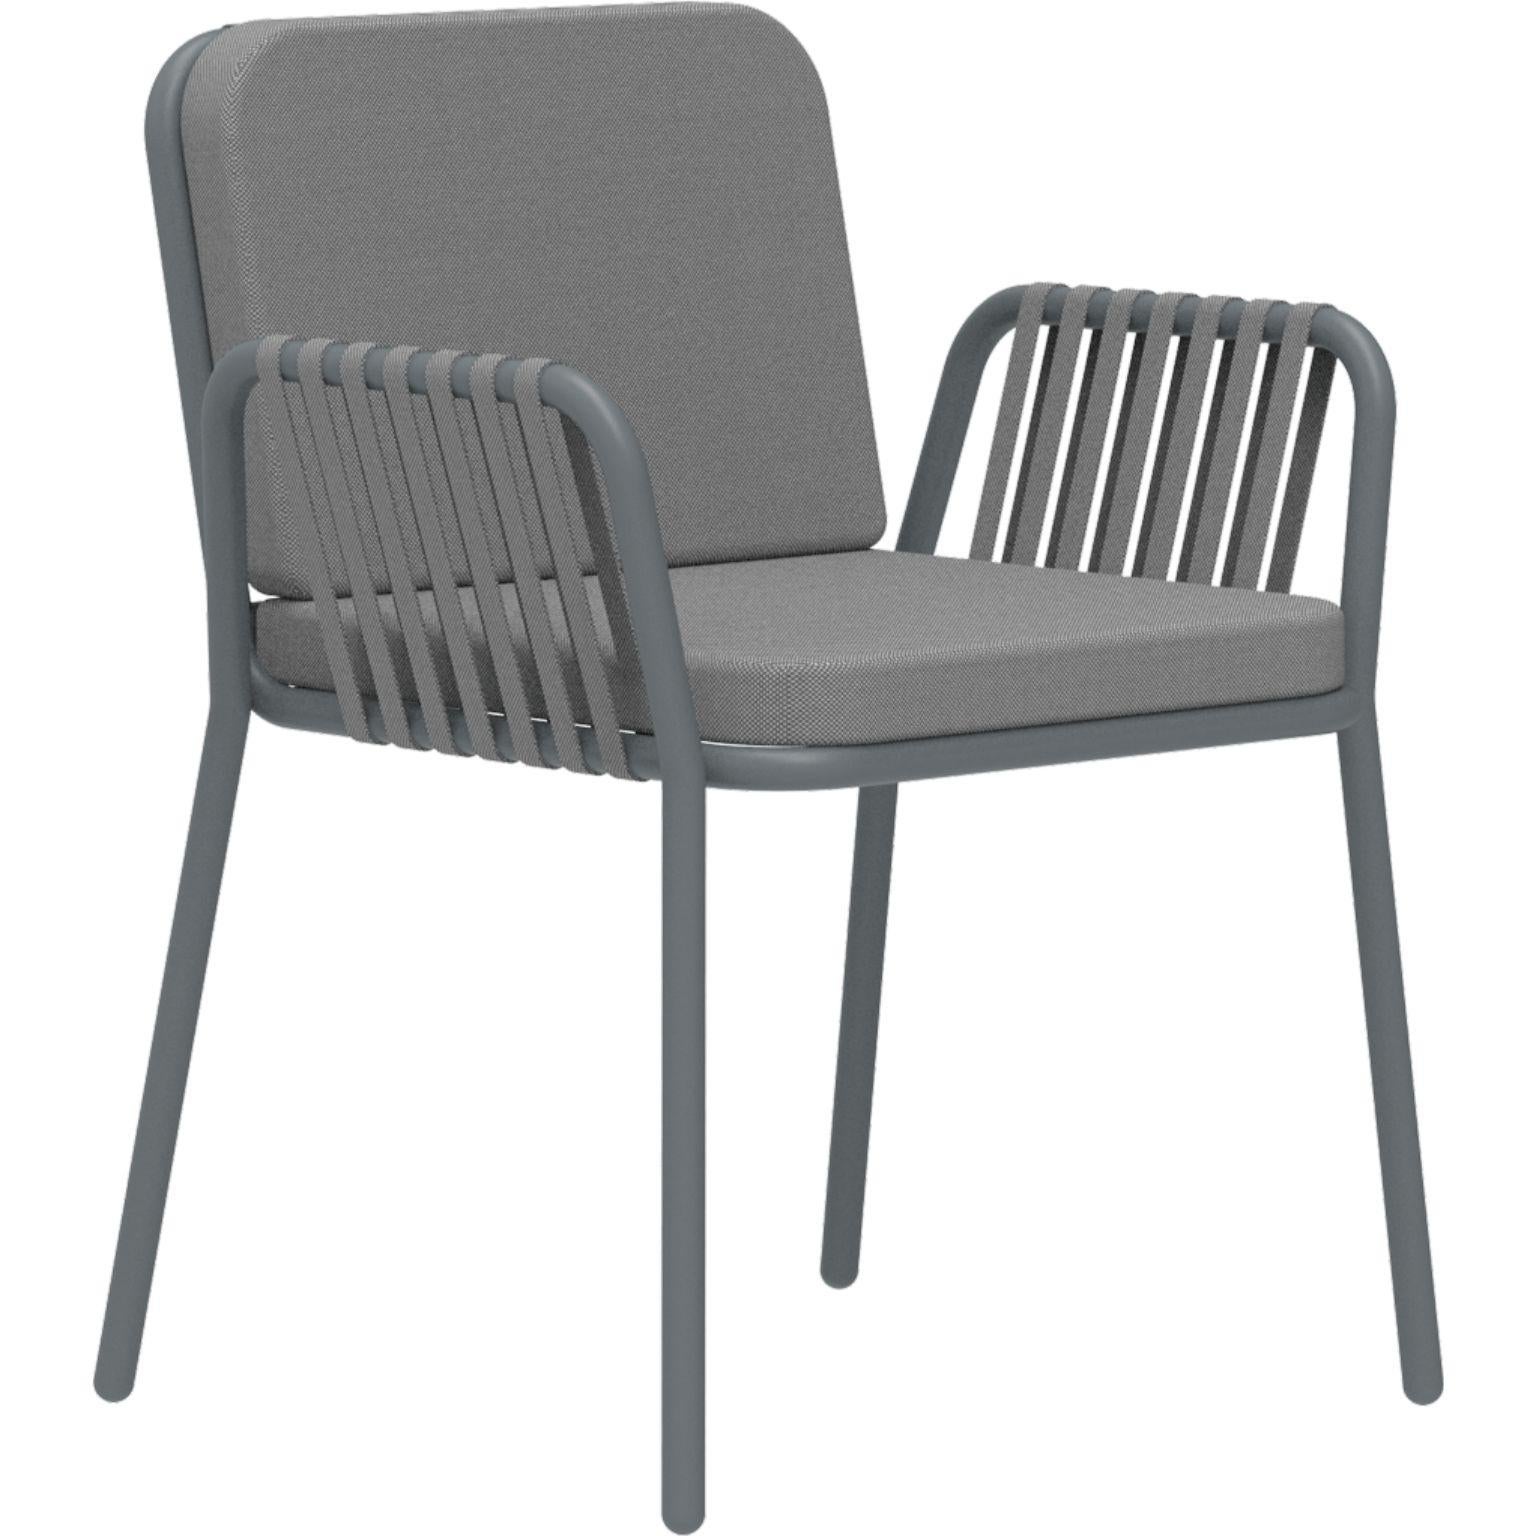 Ribbons grey armchair by MOWEE
Dimensions: D60 x W62 x H83 cm (seat height 48).
Material: Aluminum and upholstery.
Weight: 5 kg.
Also available in different colors and finishes.

An unmistakable collection for its beauty and robustness. A